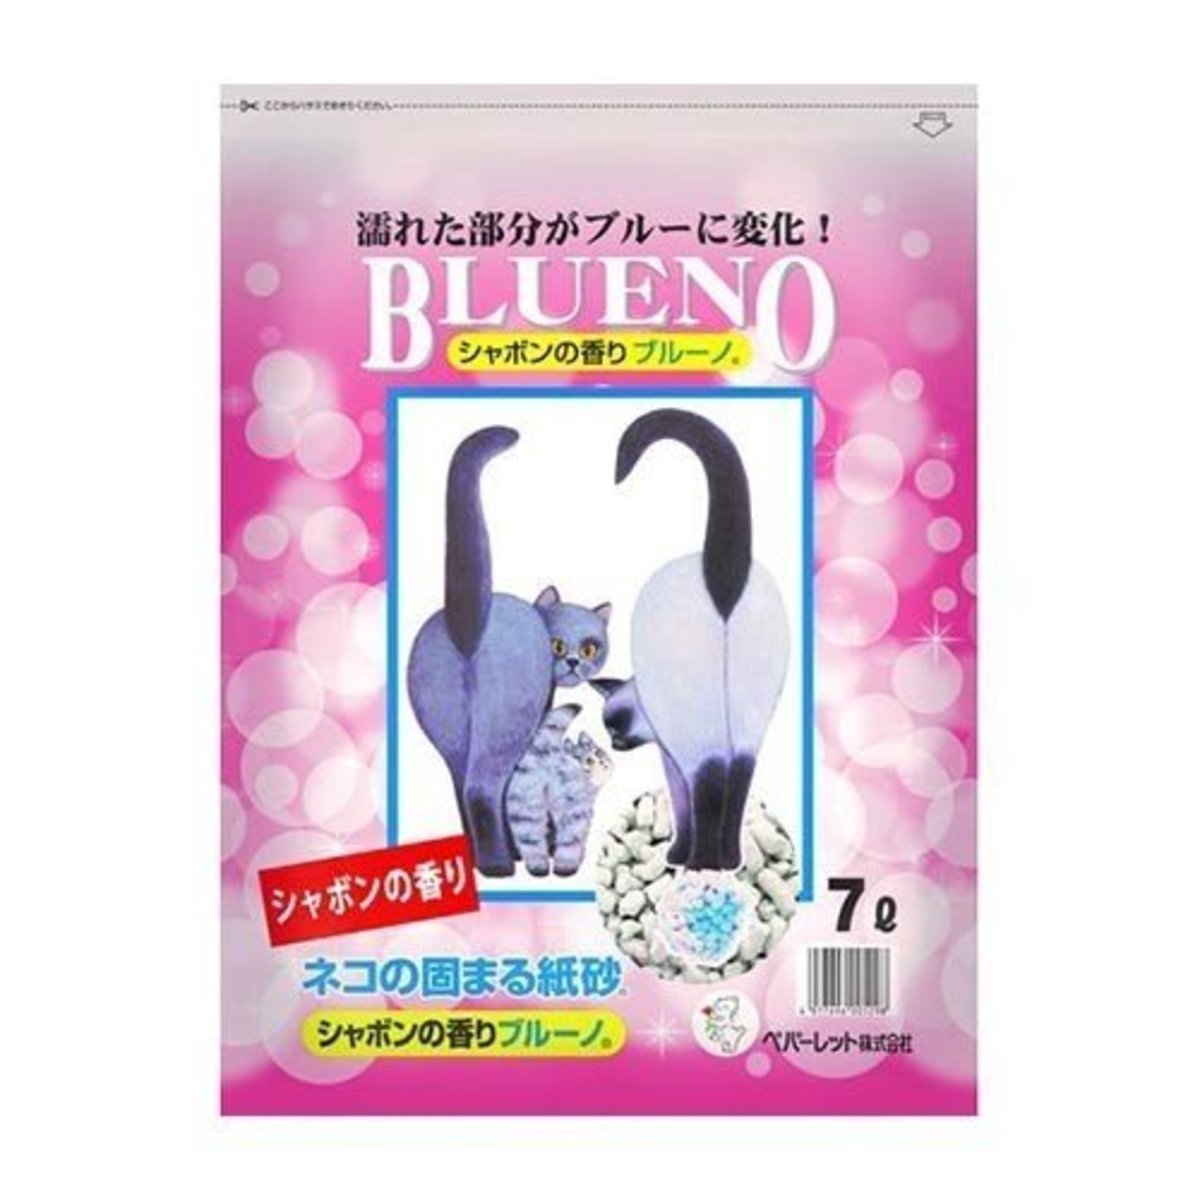 Japan BLUENO Blue-turning Recycled Paper Cat Litter - Body Soap 7L 6005298